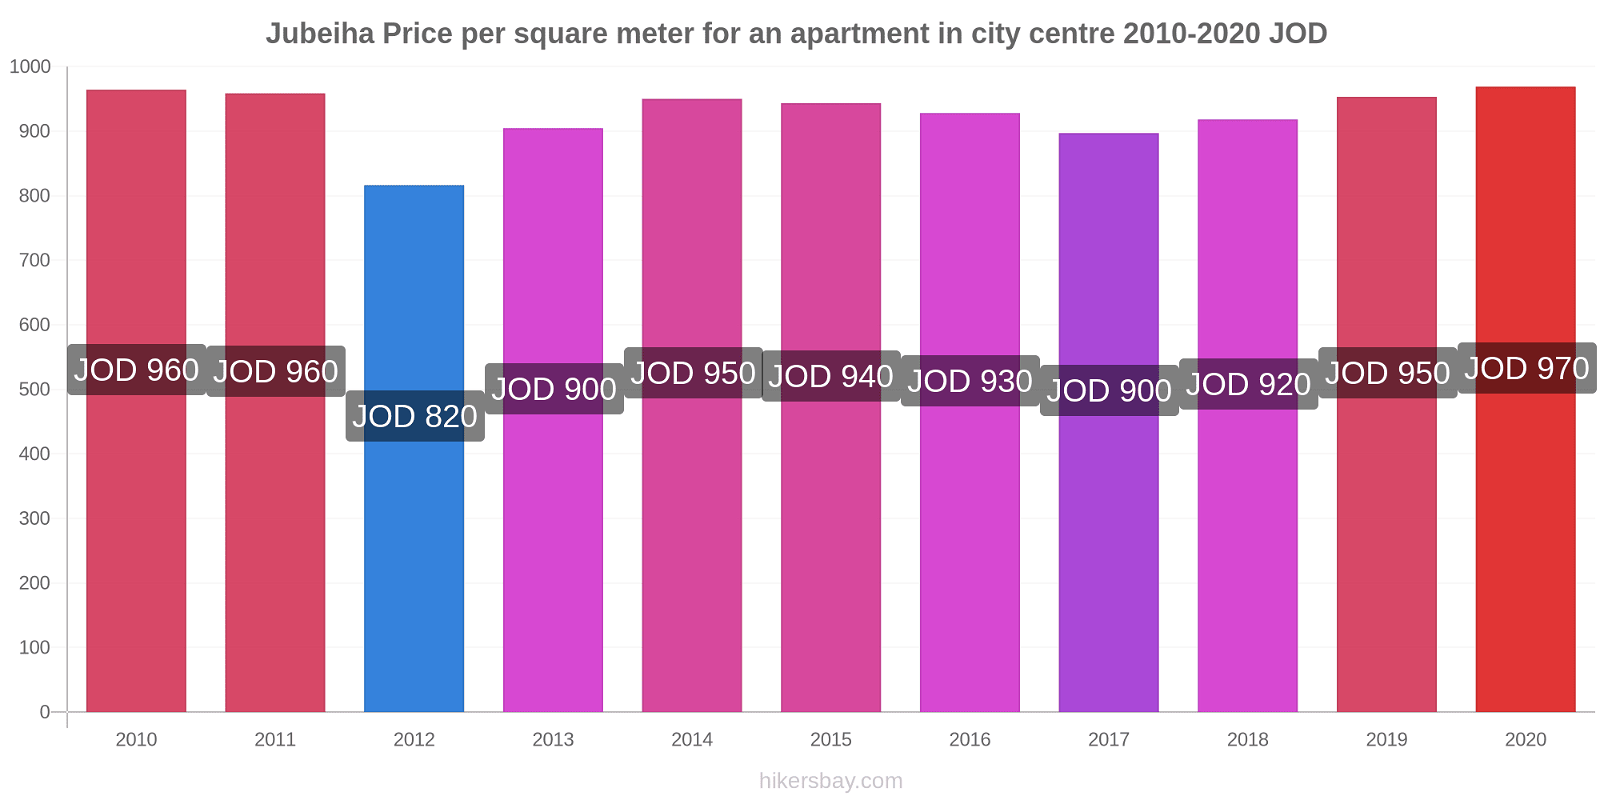 Jubeiha price changes Price per square meter for an apartment in city centre hikersbay.com